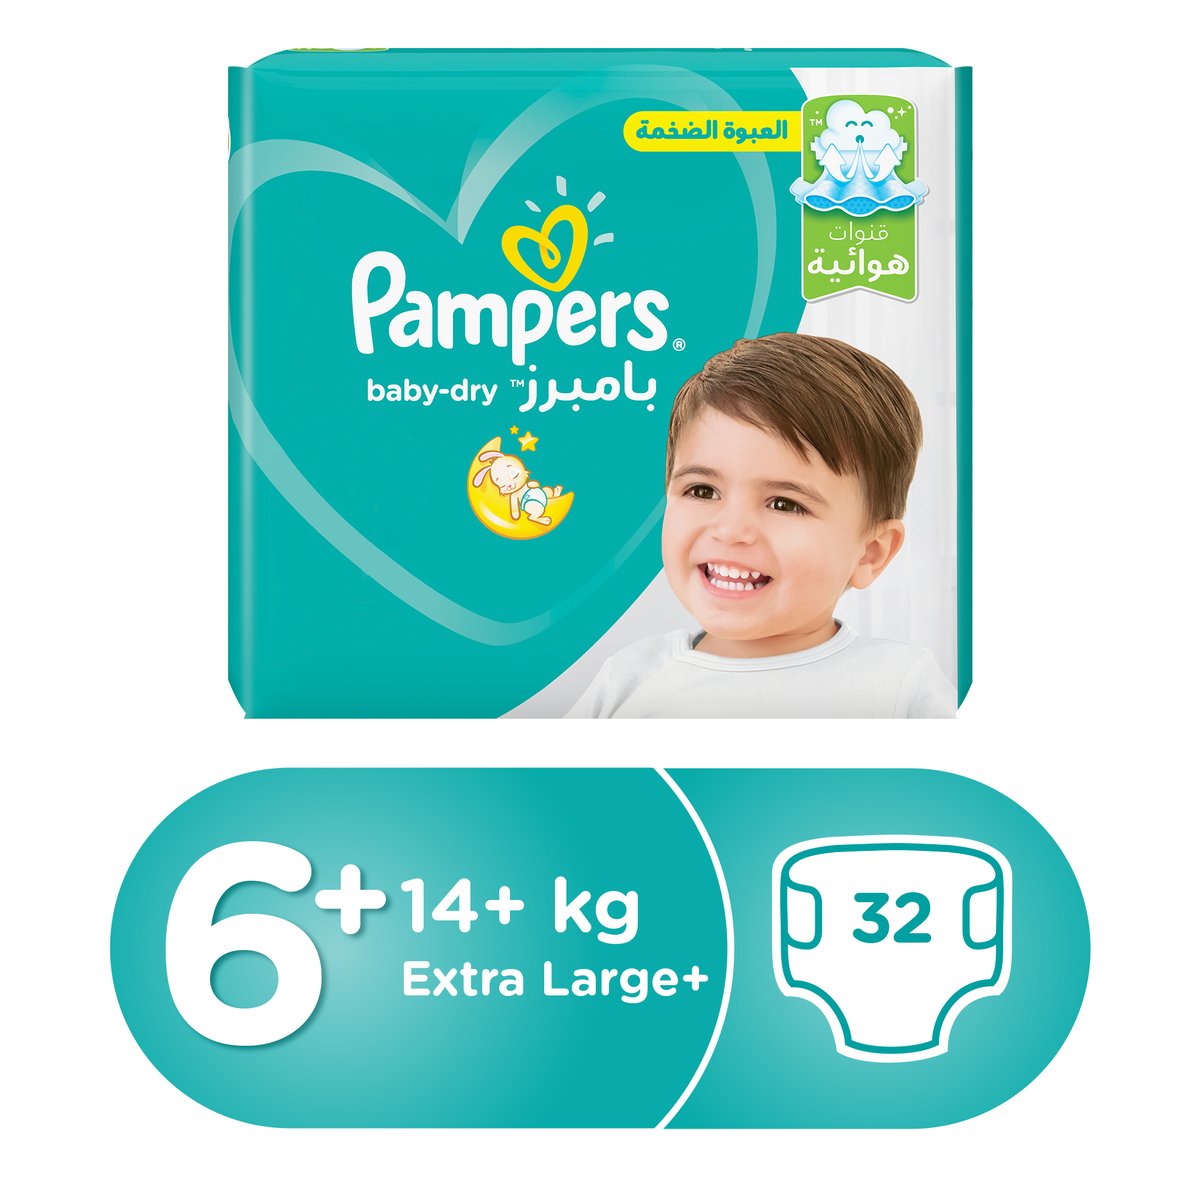 Pampers Baby Dry Diapers Size 6+ , 14+kg,Extra Large+ 32pcs